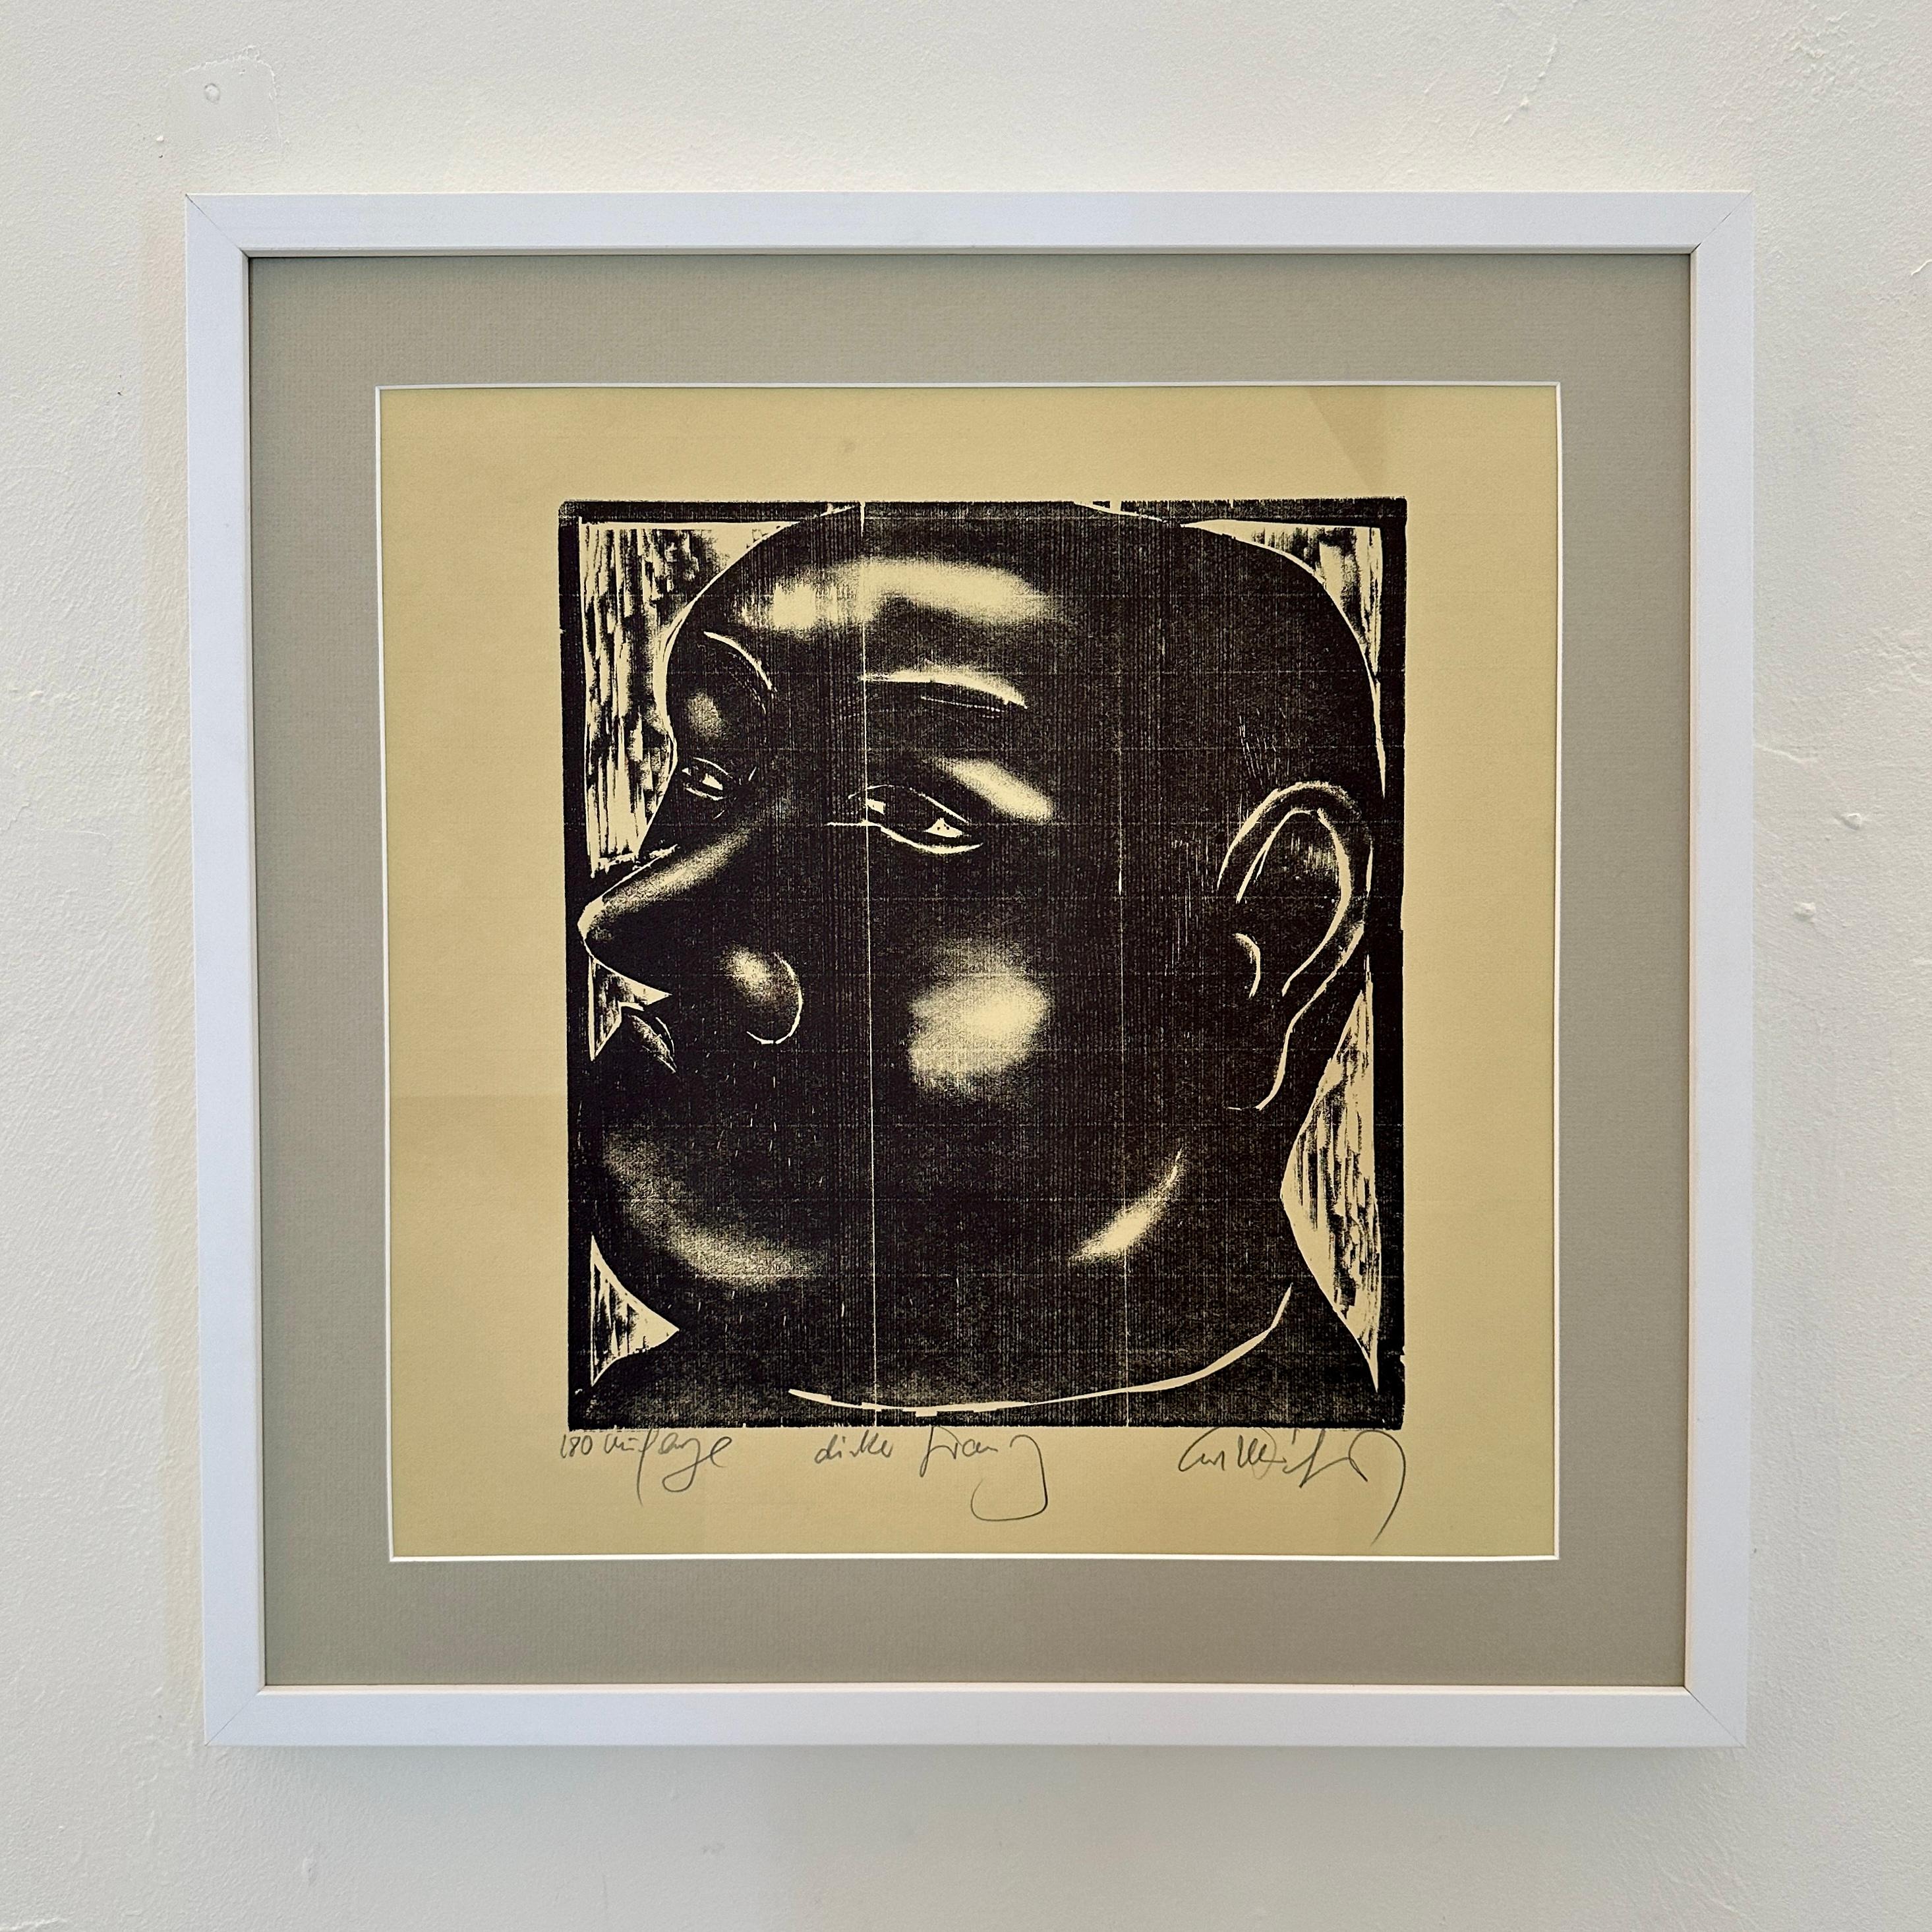 Crafted around 1970, this Mid Century Framed Linoleum Cut on Paper captures the essence of a bygone era. The portrait, depicting a man, exudes a timeless charm and character. 
Created through the meticulous linoleum cut technique, it showcases the